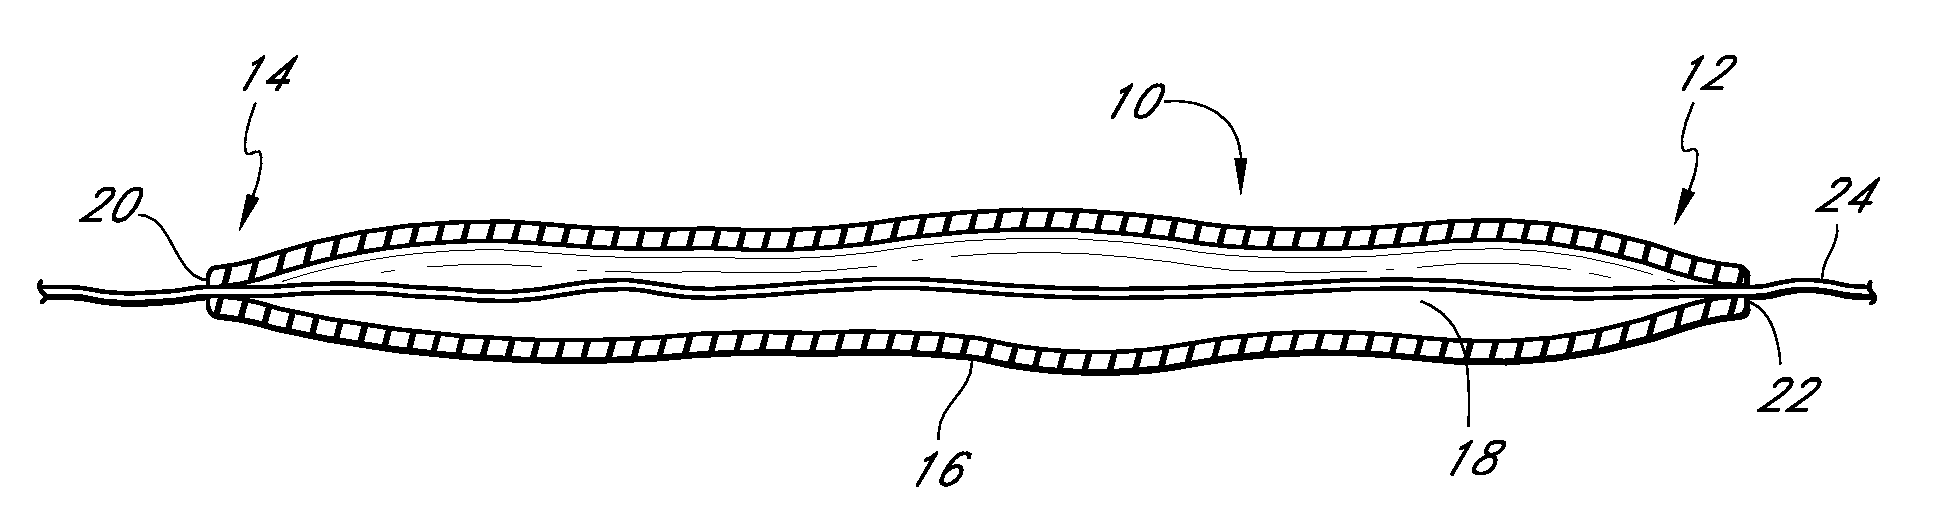 Tissue implant having a biased layer and compliance that simulates tissue